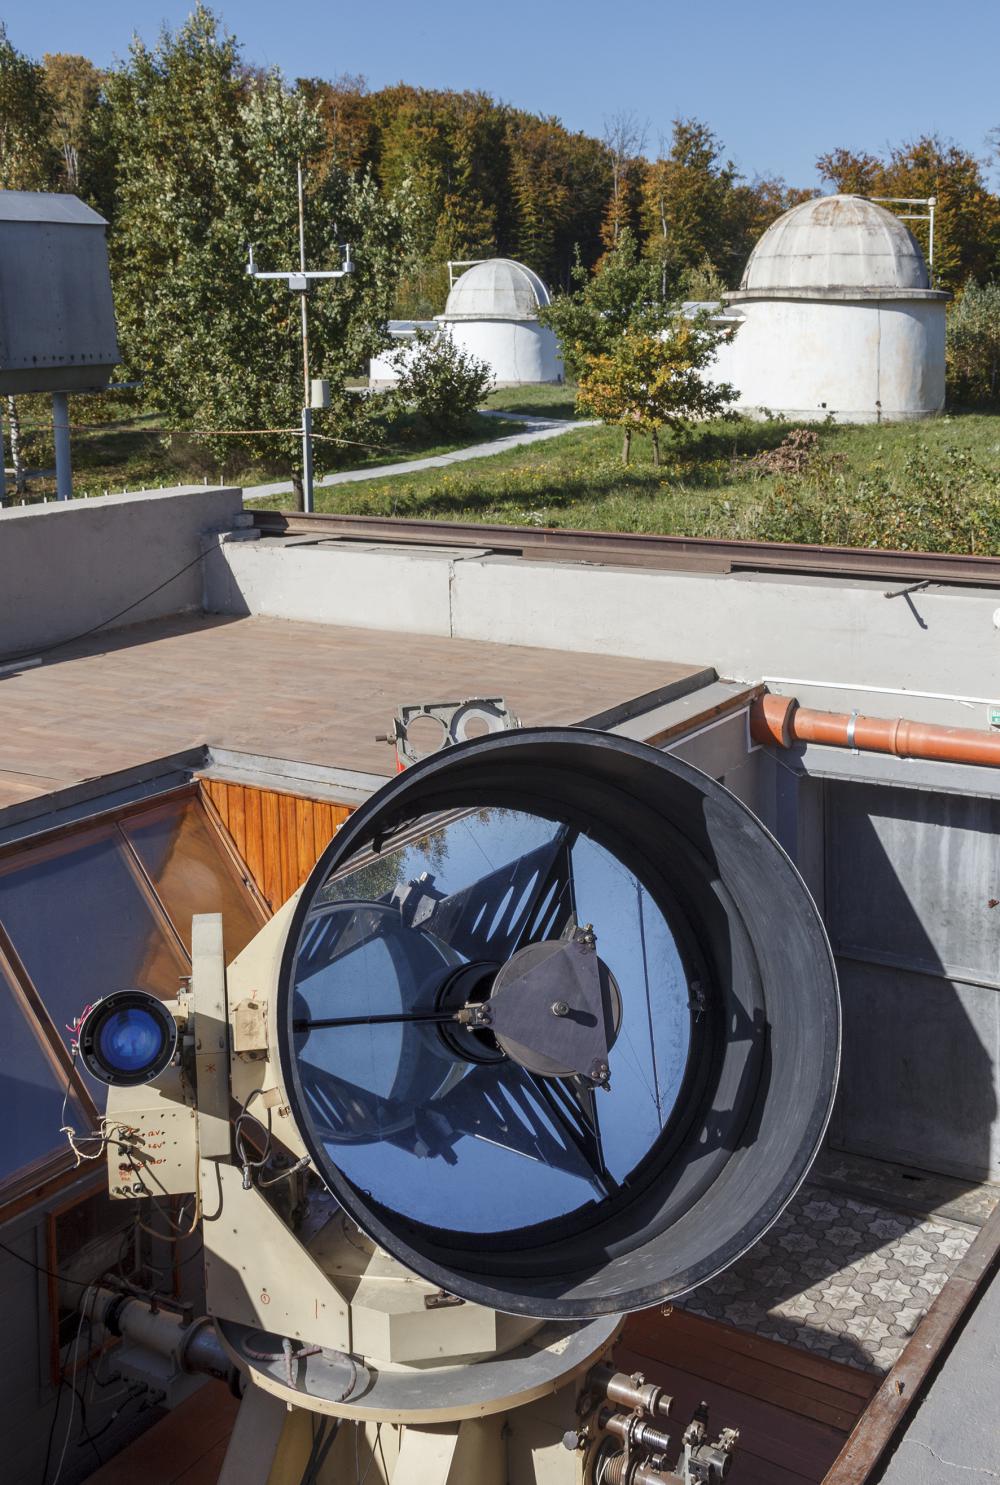 Domes of the telescopes AZT-14, AVR-2, and TPL-1M 